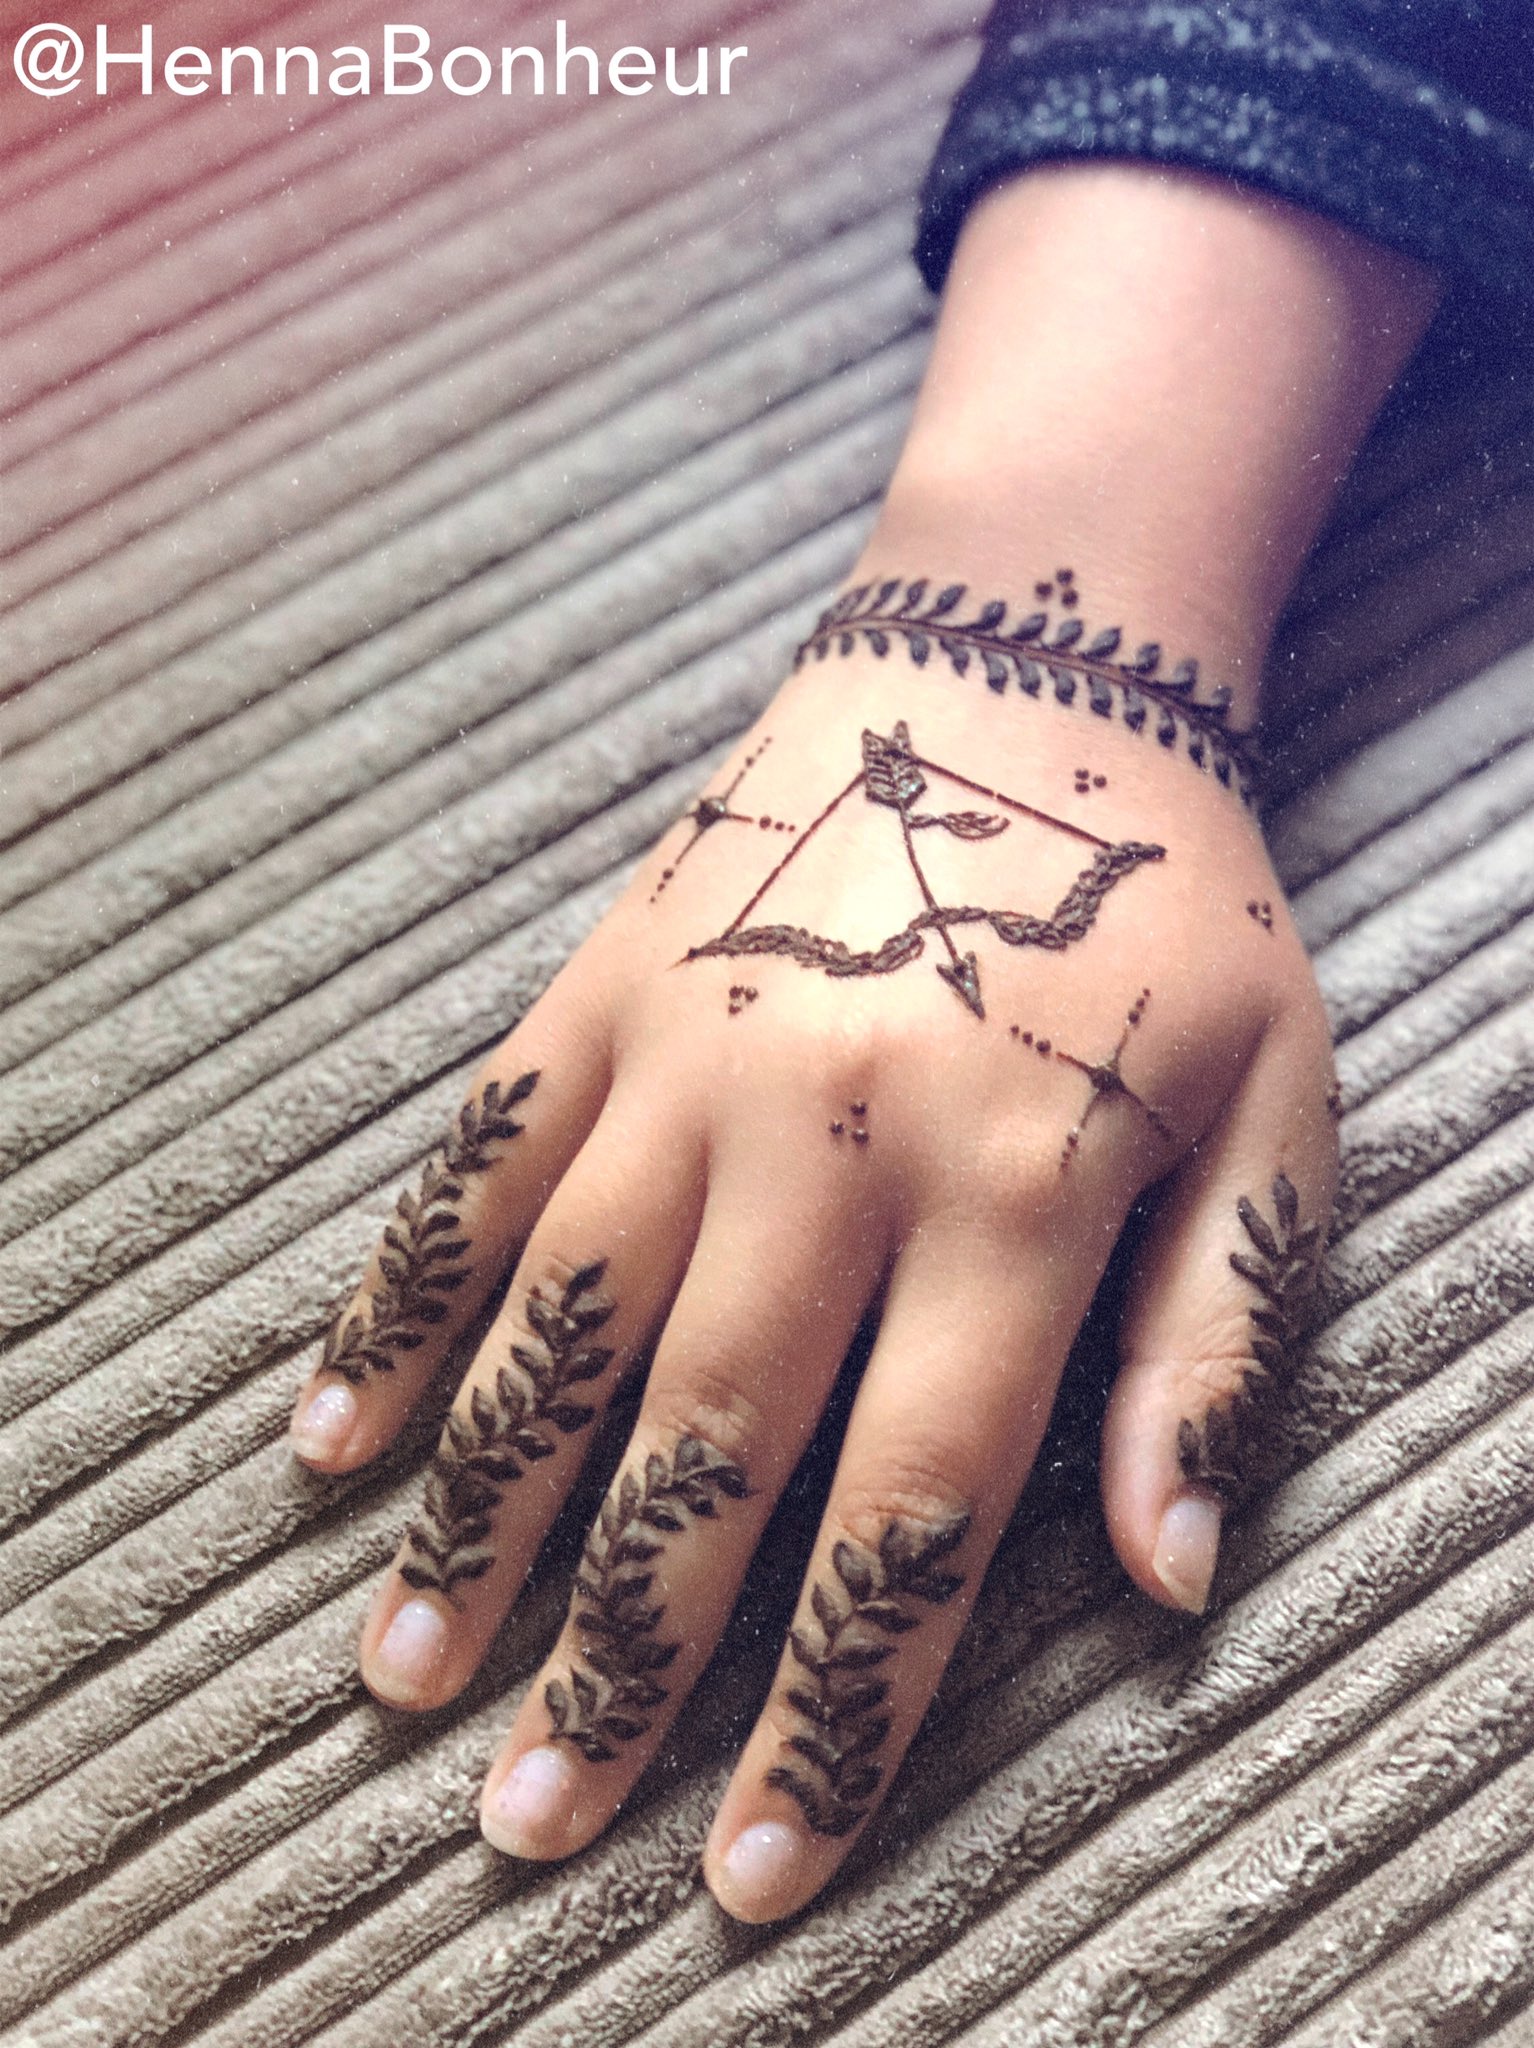 27 Unique Tattoo Designs for Women to Embrace Individuality